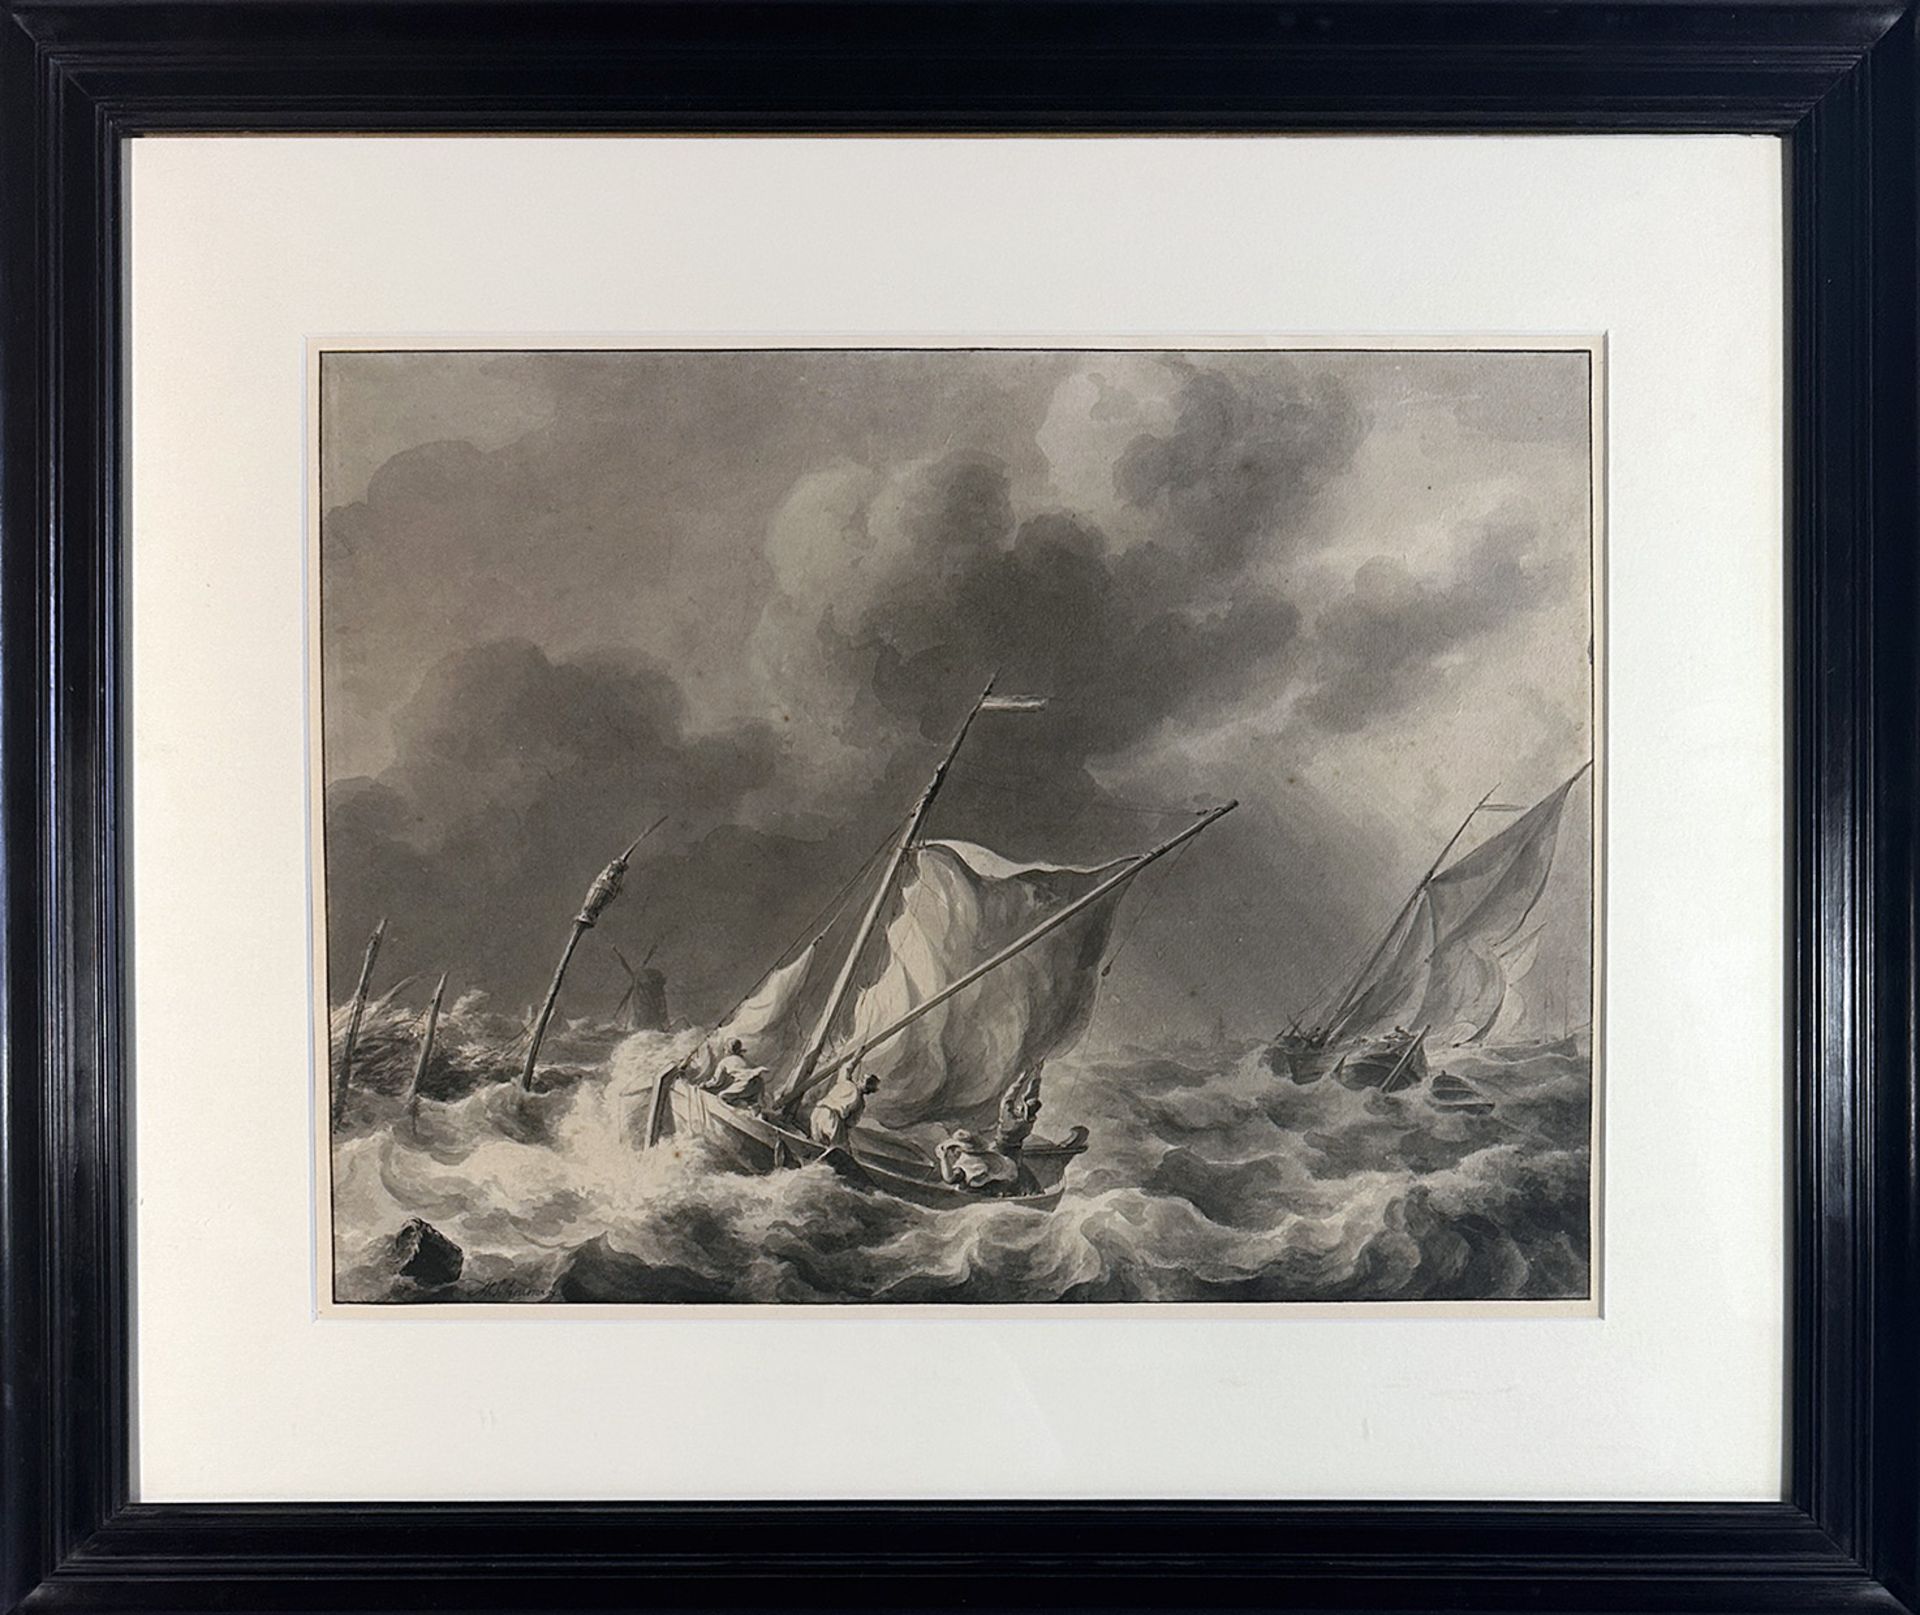 SCHOUMAN, Martinus (1770-1848). (Ships in stormy waters). N.d. Drawing in pen and